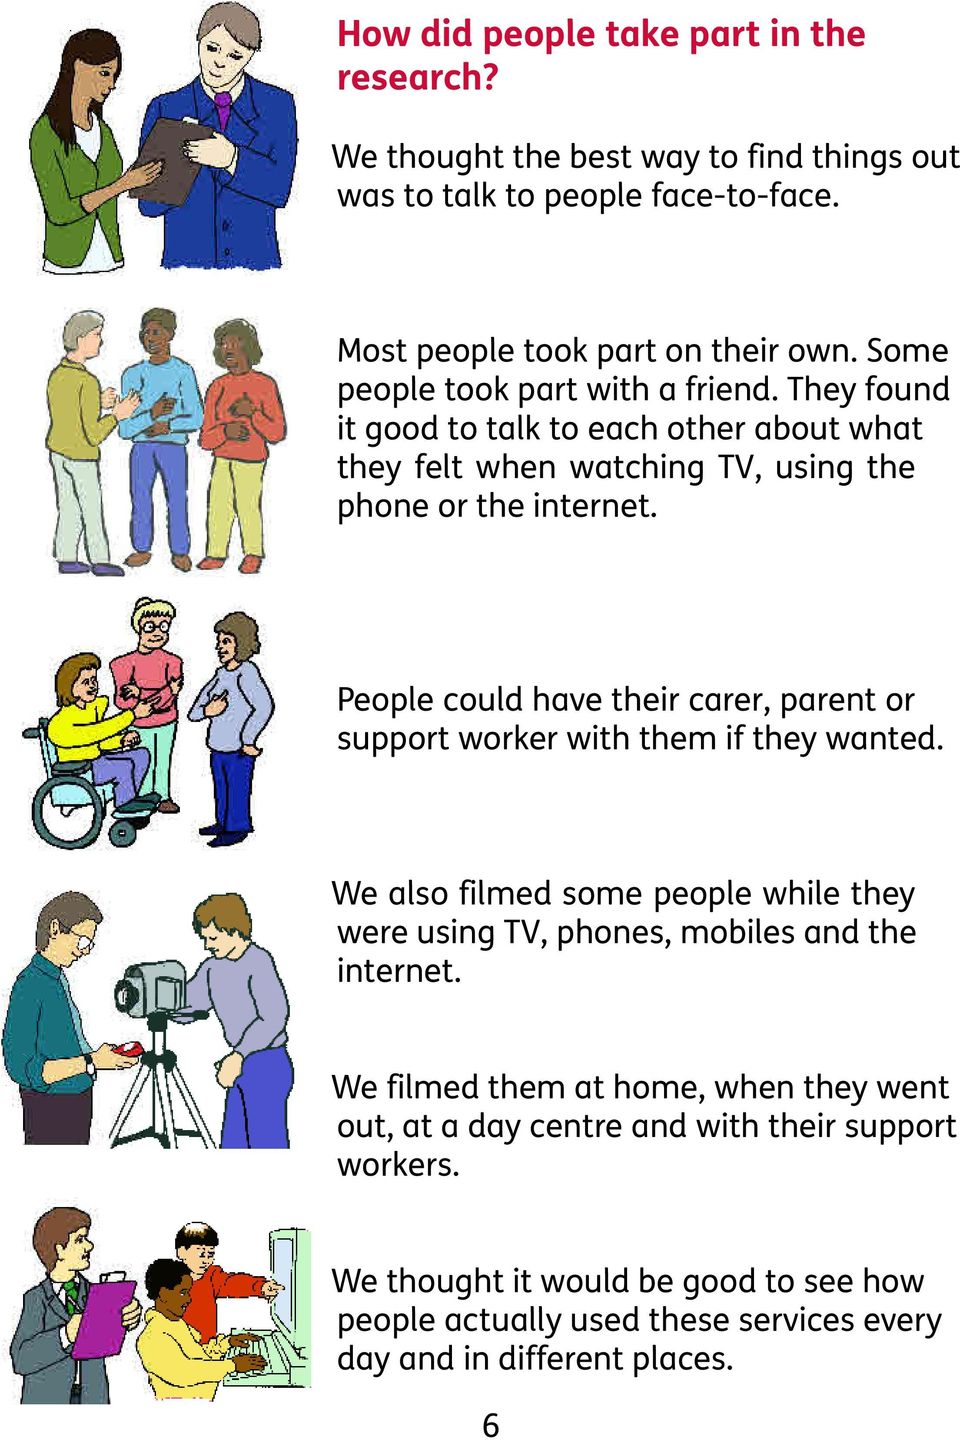 People could have their carer, parent or support worker with them if they wanted. We also filmed some people while they were using TV, phones, mobiles and the internet.